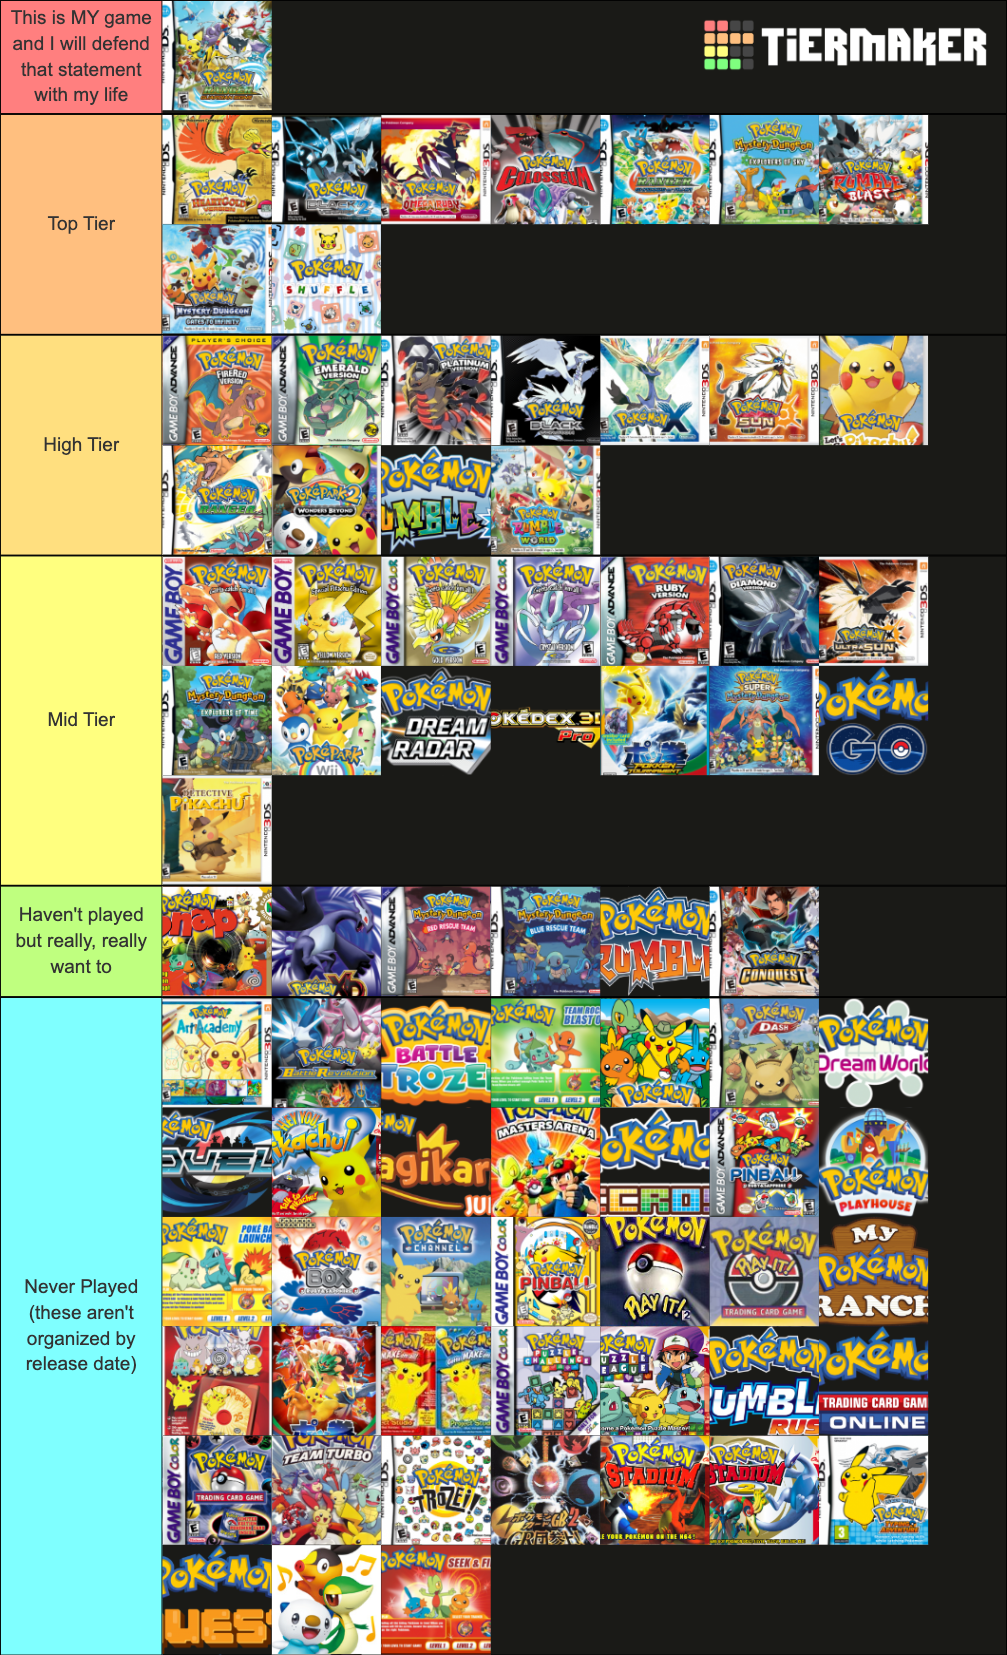 Every Single Pokémon Game Ranked: What's your tier list like?